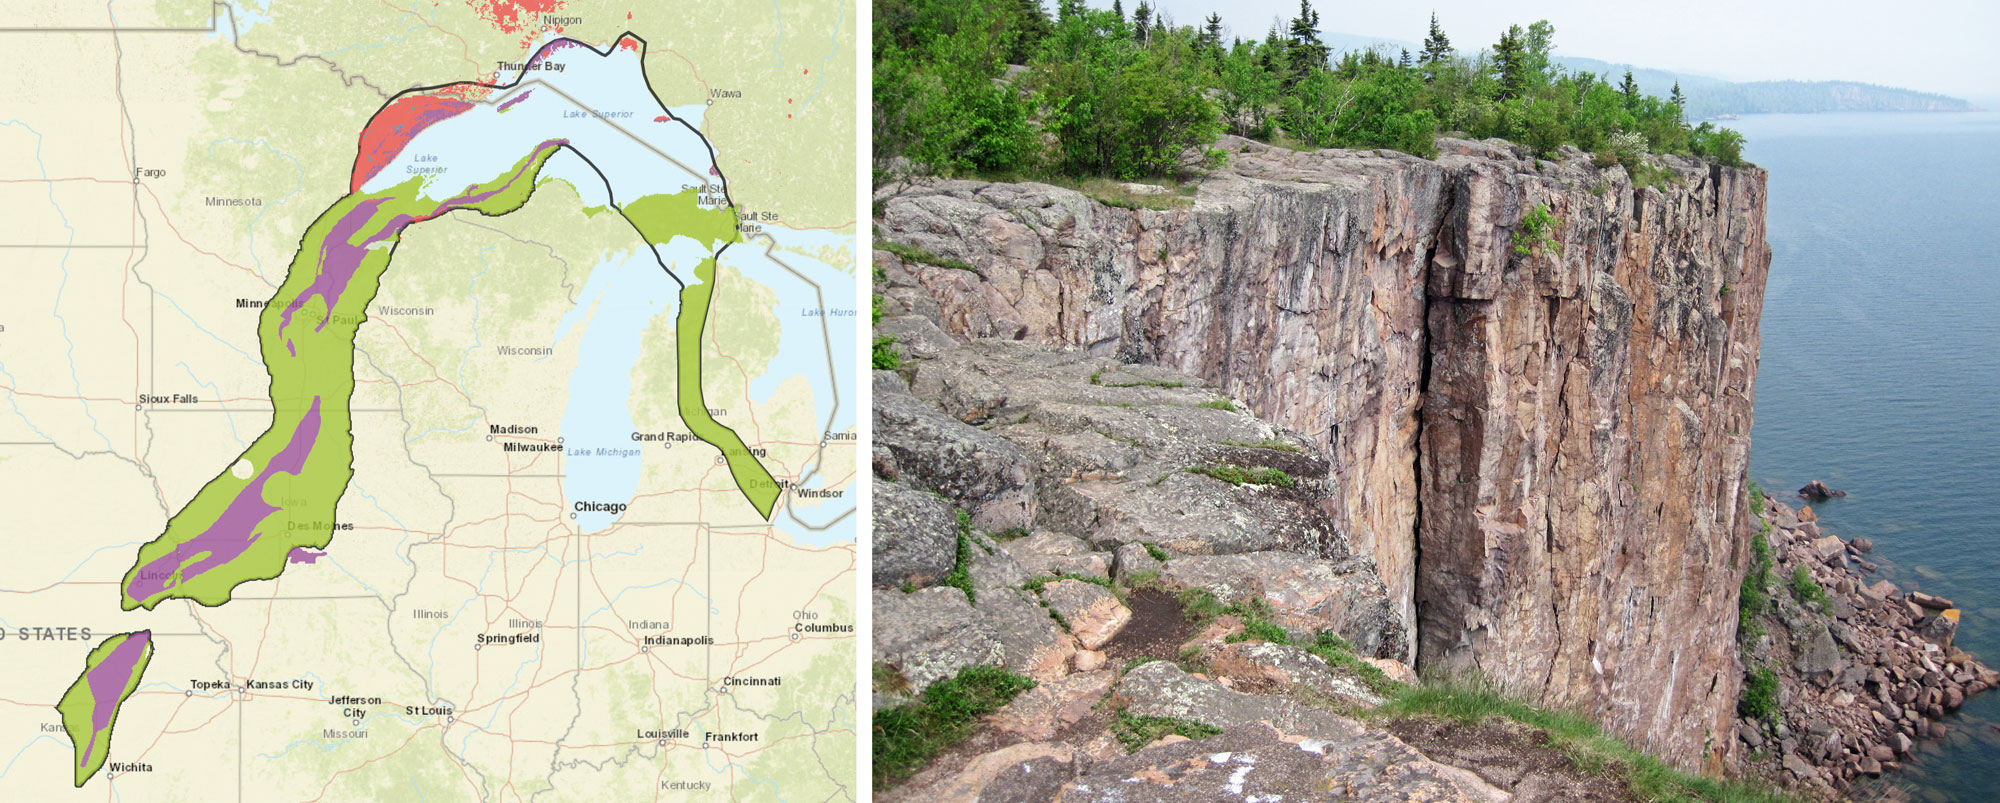 Two-panel image of the Midcontinent Rift System. Panel 1: Map of a portion of the Midwestern U.S. with the boundaries of the rift indicated by a black line. Sedimentary, metaphoric, and igneous rocks are mapped. Panel 2: Photo of Precambrian rhyolite forming a cliff on the edge of Lake Superior in Minnesota. The rhyolite has a pinkish color.